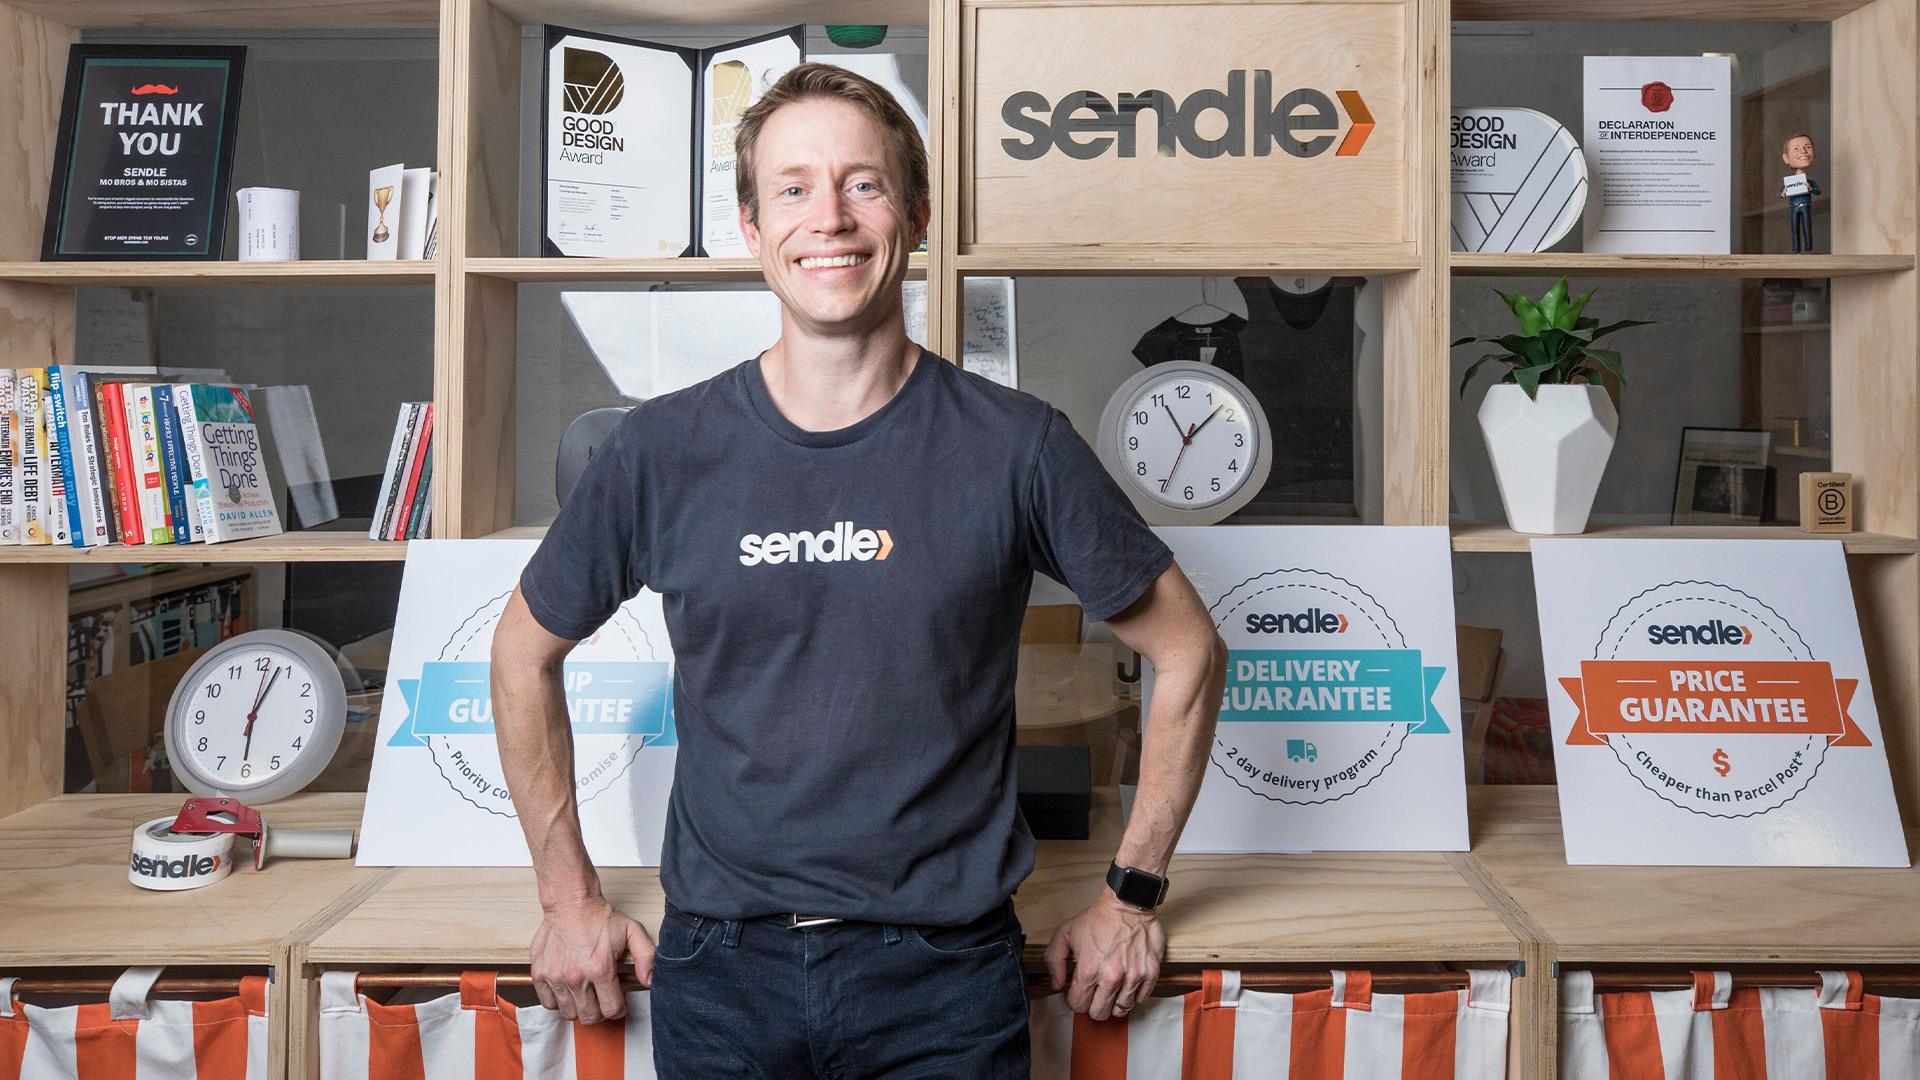 Sendle CEO Founder James Chin Moody standing behind the books shelf